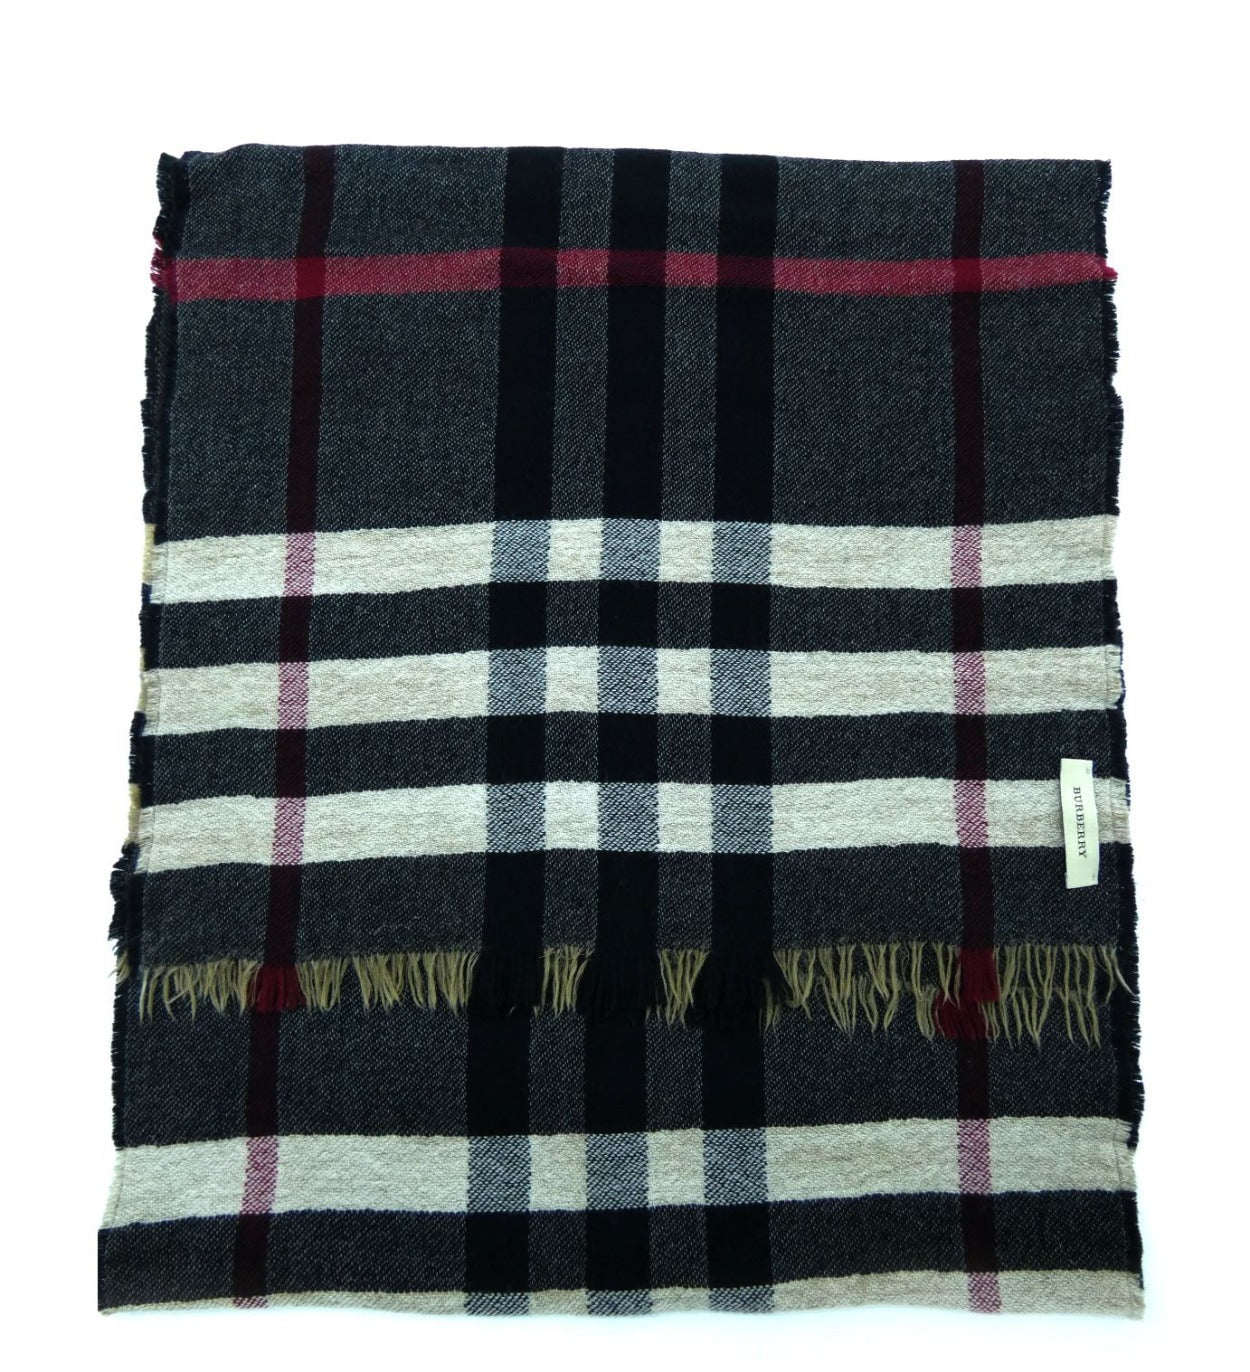 Burberry Lambswool Giant Nova Check Black and Camel Scarf/Shawl Scarf Burberry